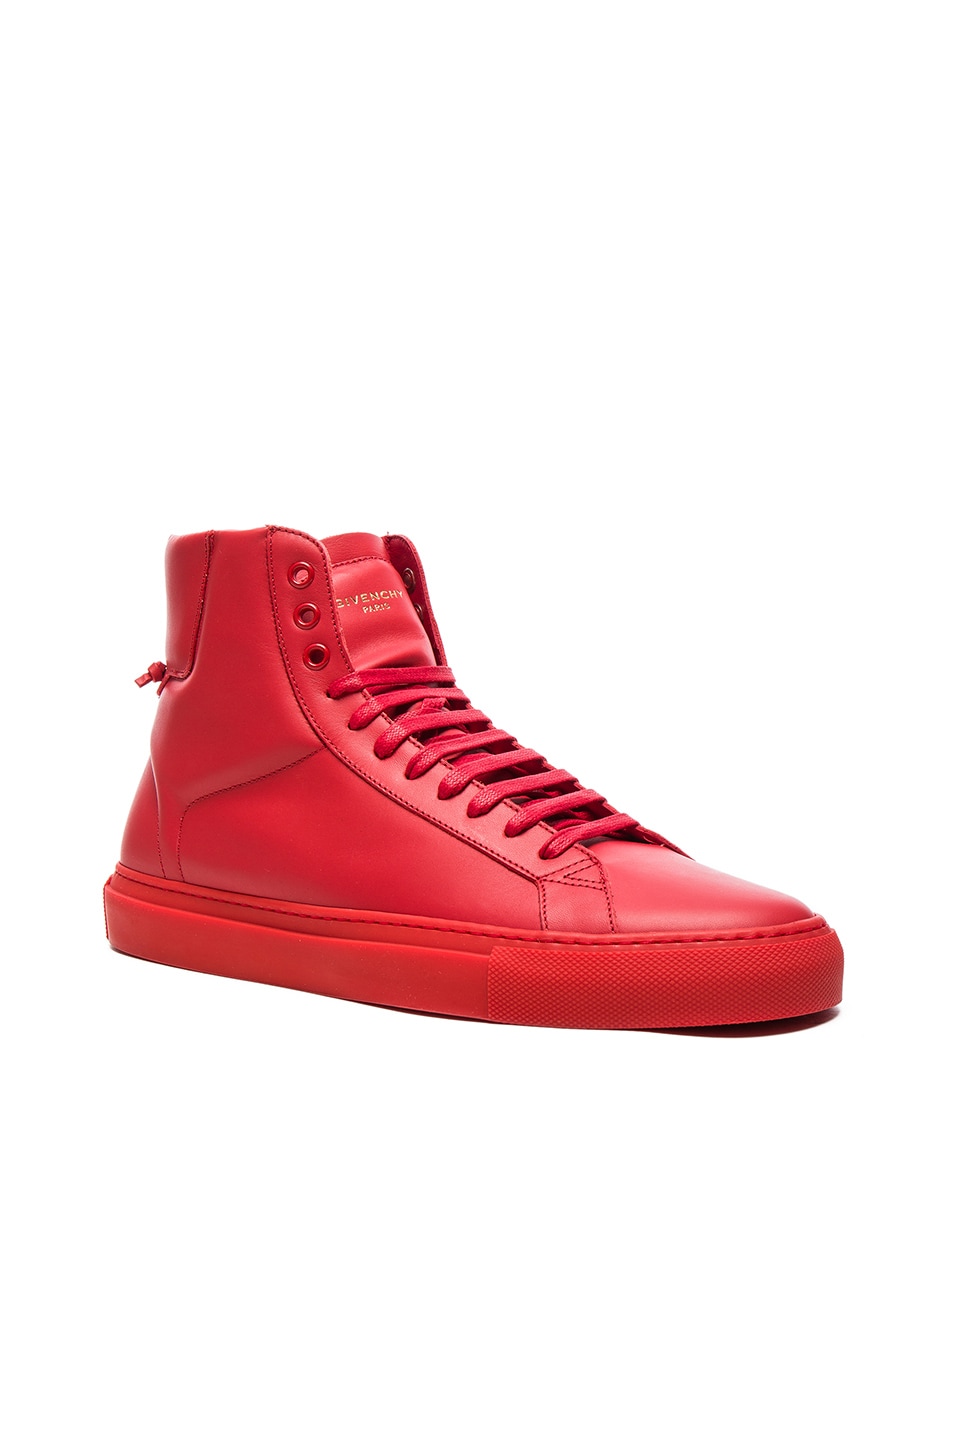 Image 1 of Givenchy Urban Street High Top Sneakers in Red